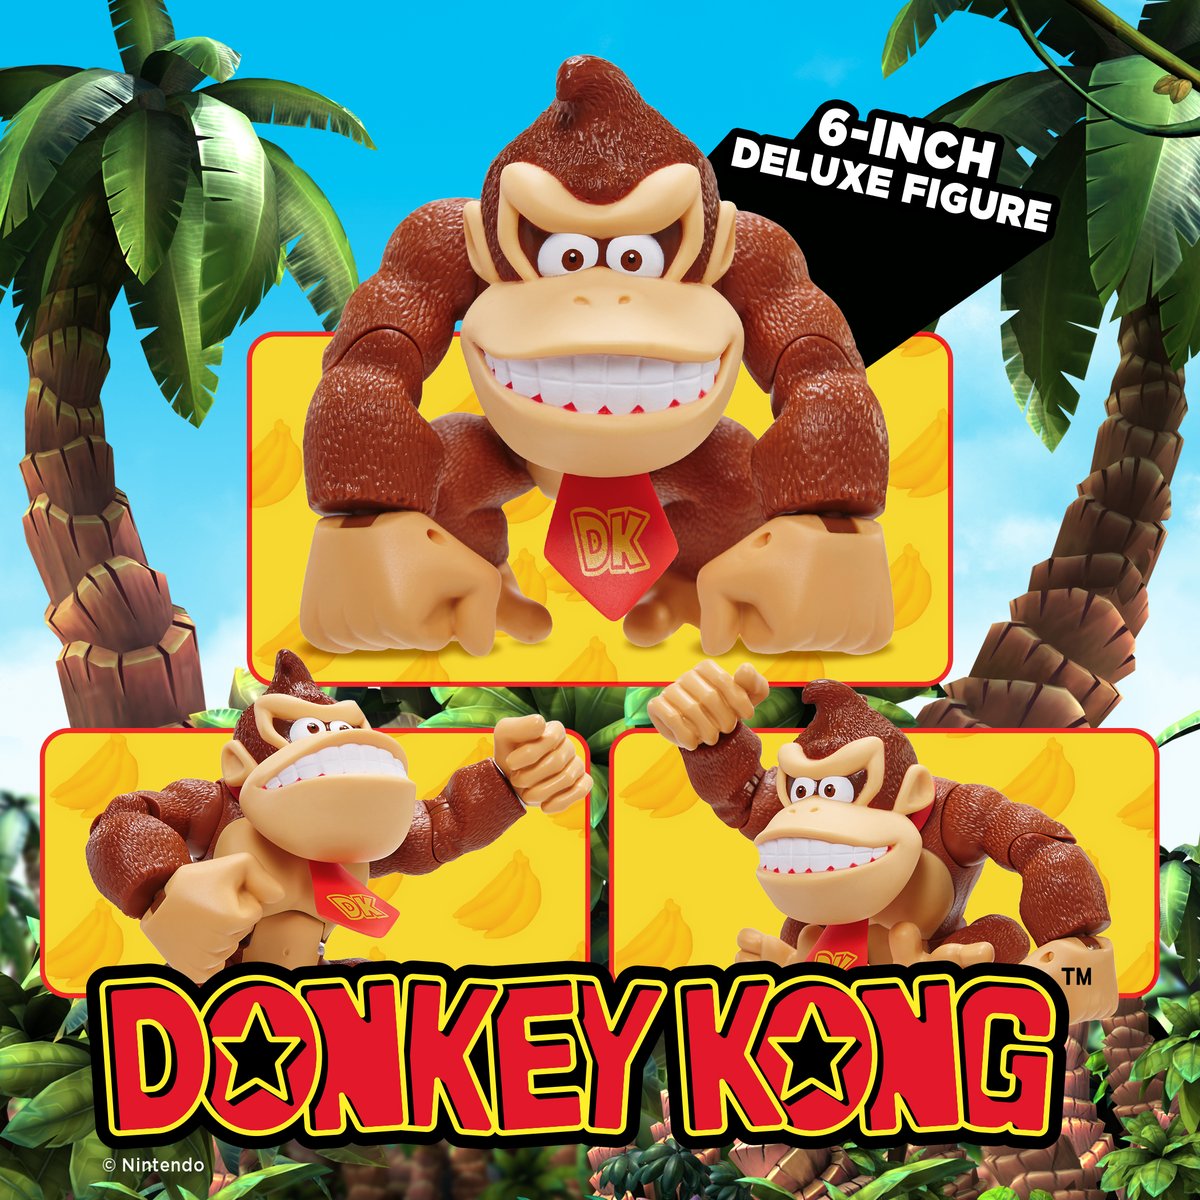 Collect all your favorite #SuperMario characters including this 6-Inch Deluxe Donkey Kong Posable figure! Shop now at @Amazon! @NintendoAmerica @NintendoInspired #DonkeyKong #Nintendo #SuperMario #JakksPacificToys